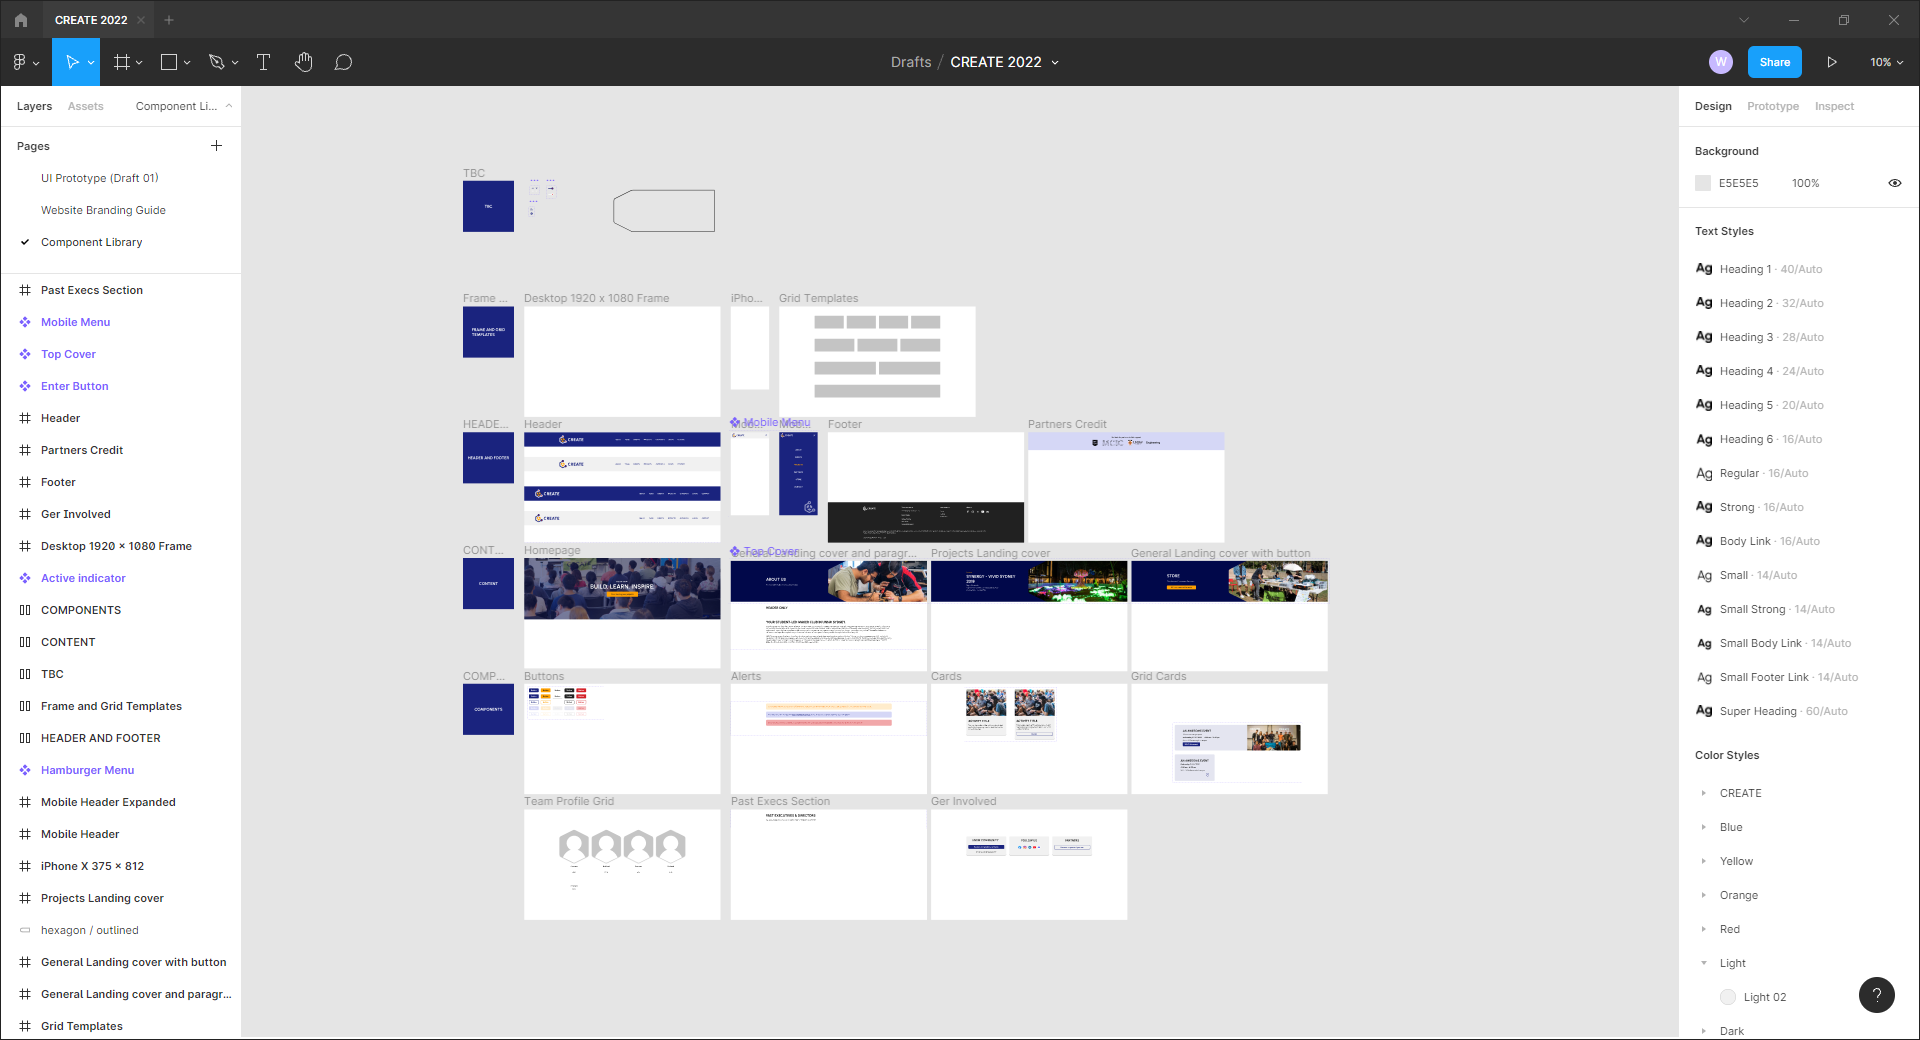 Image 2 of Redesigning CREATE UNSW Website in 2022